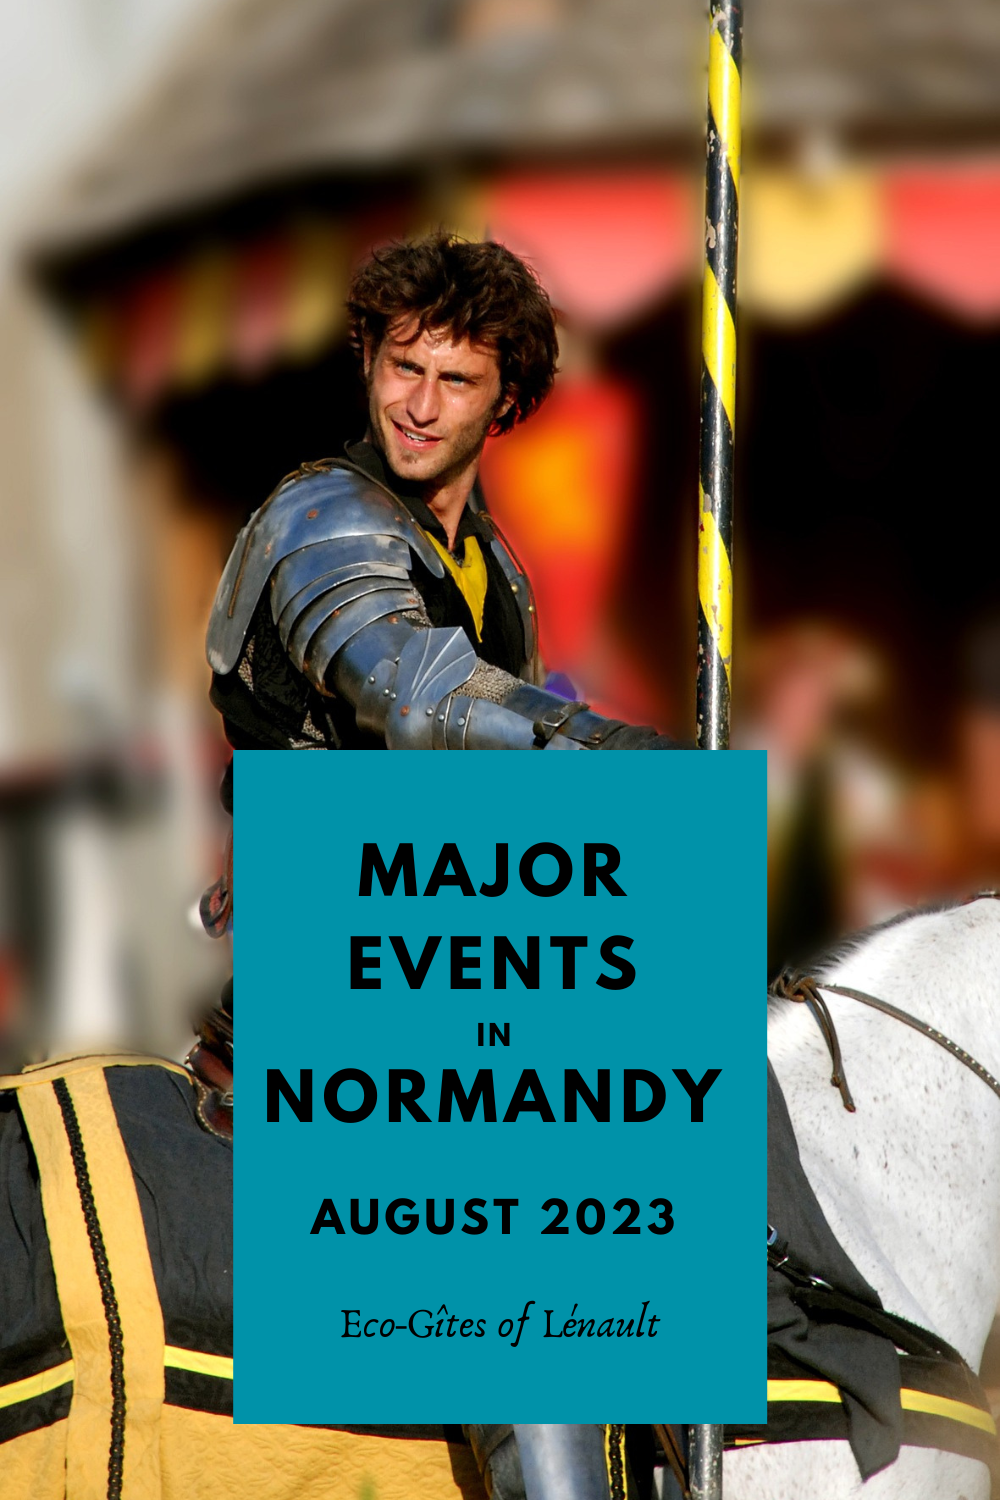 Major events in Normandy August 2023